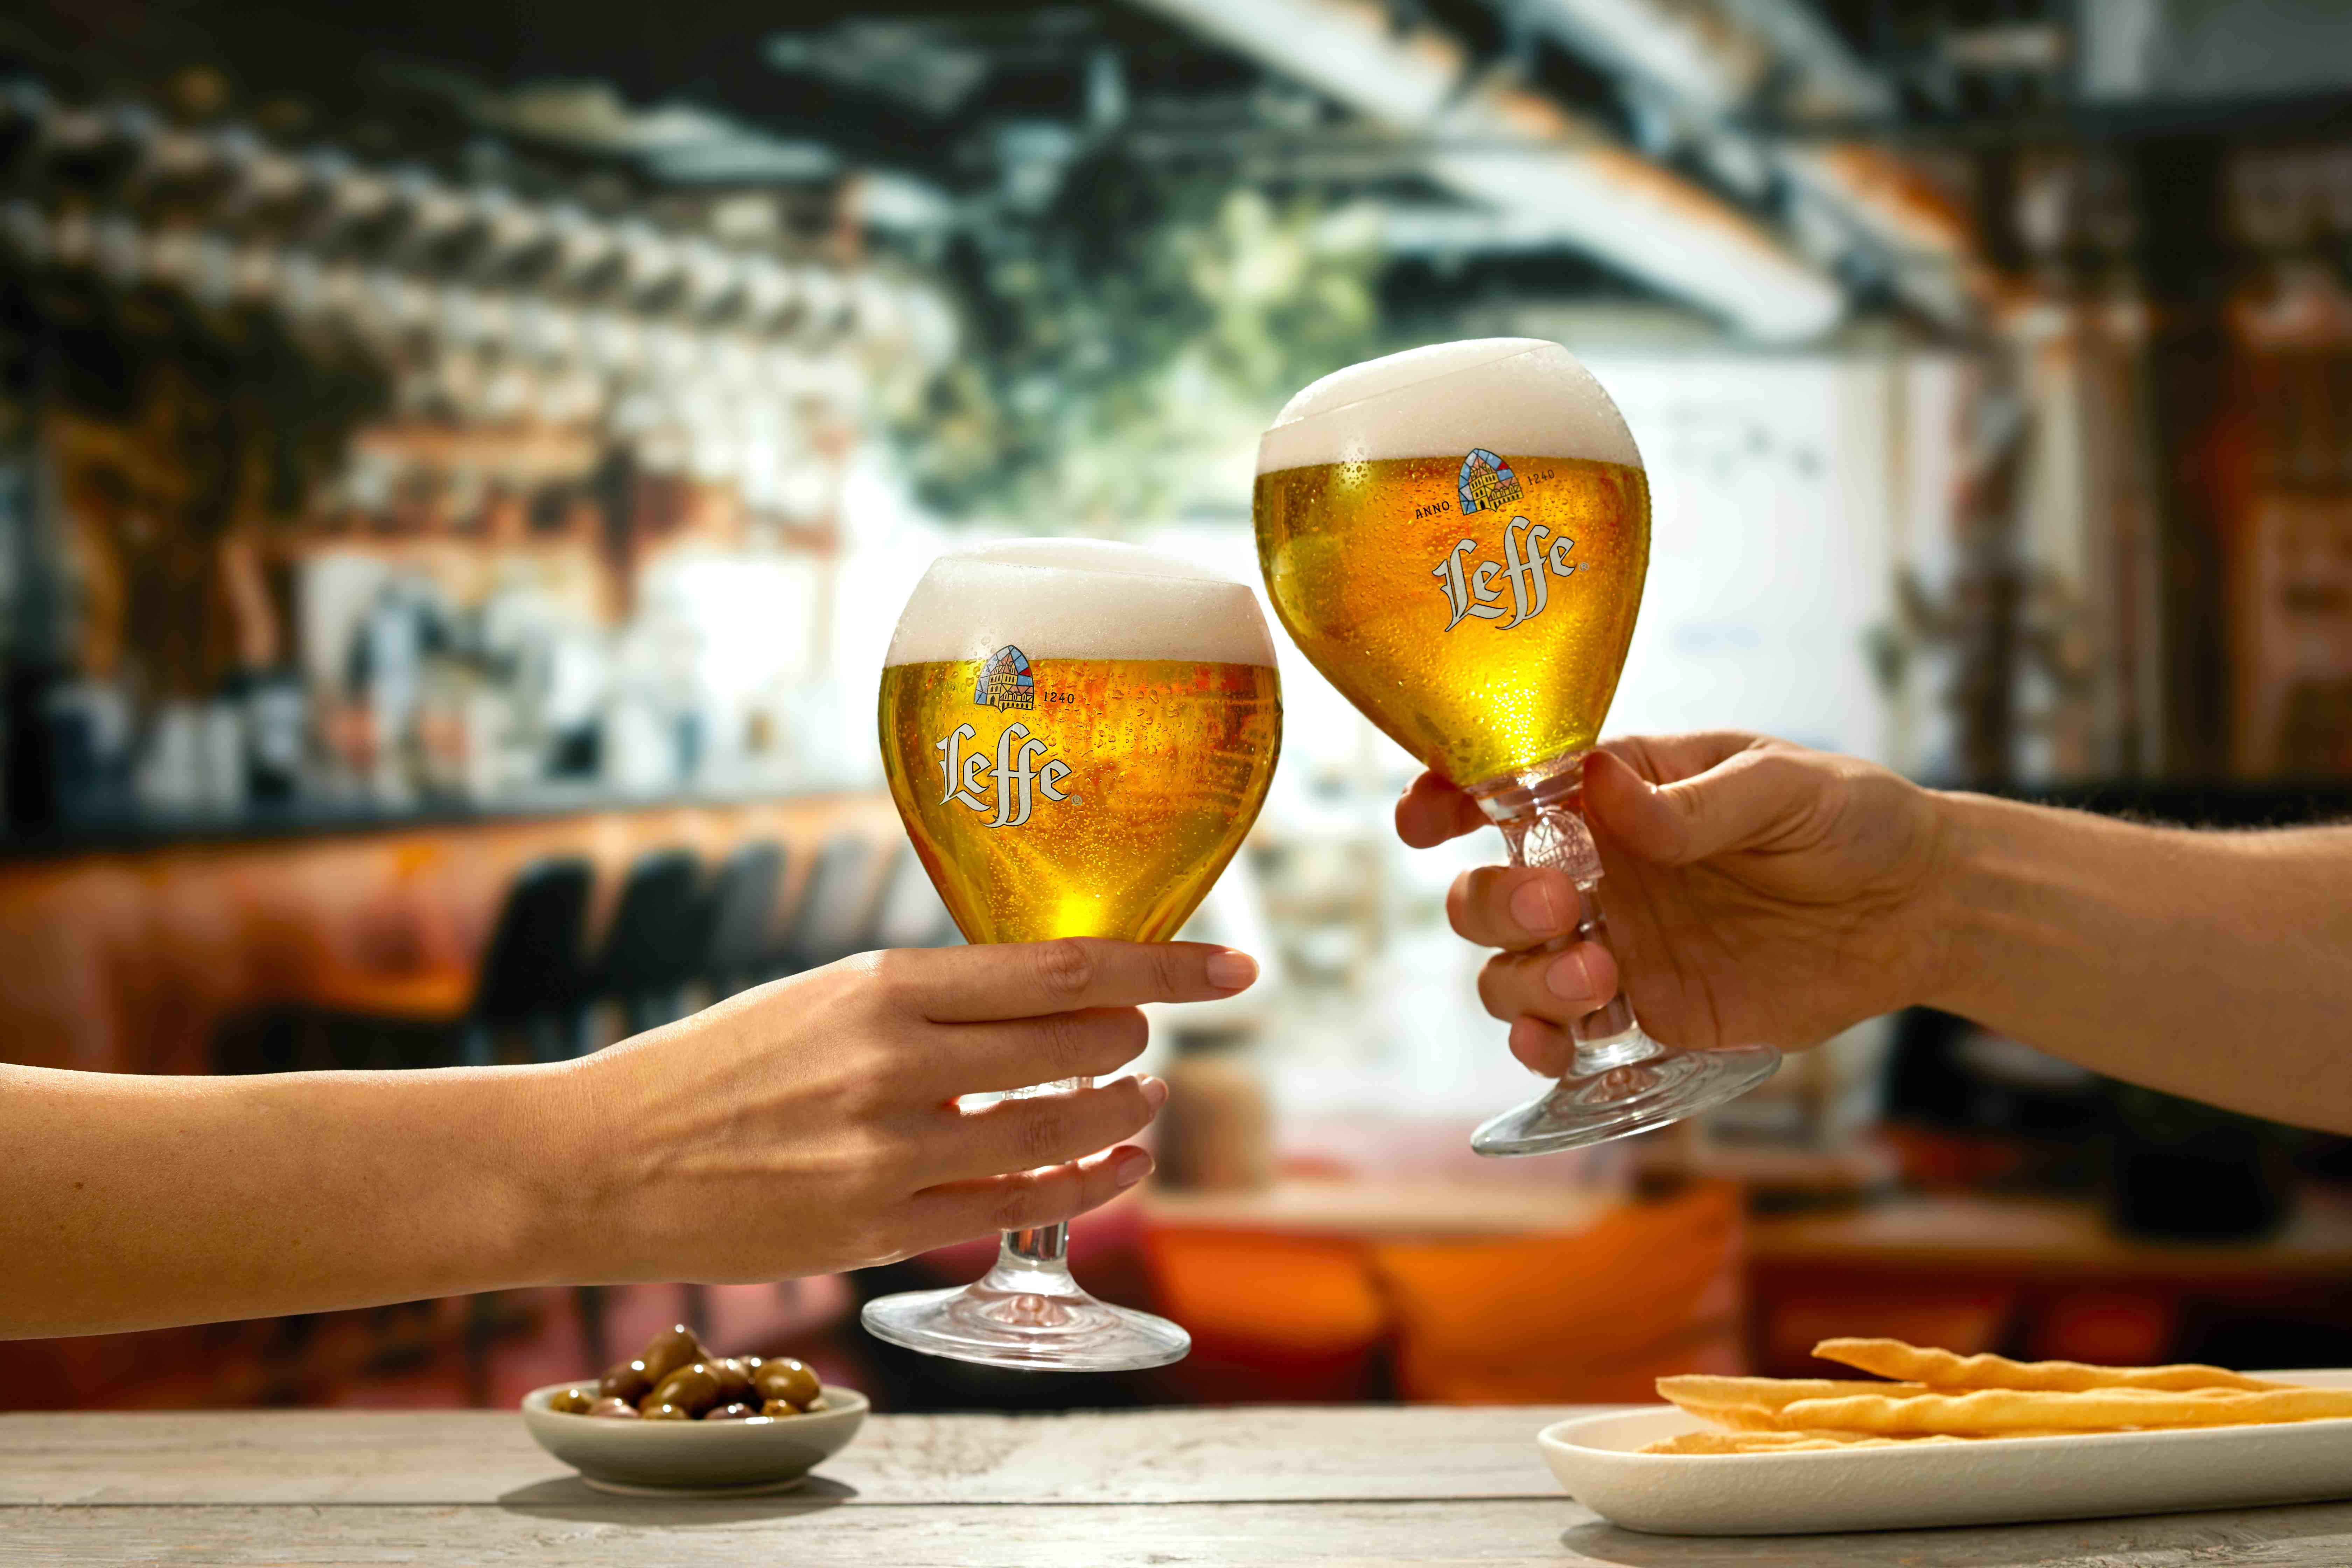 Two Leffe pint glasses being raised